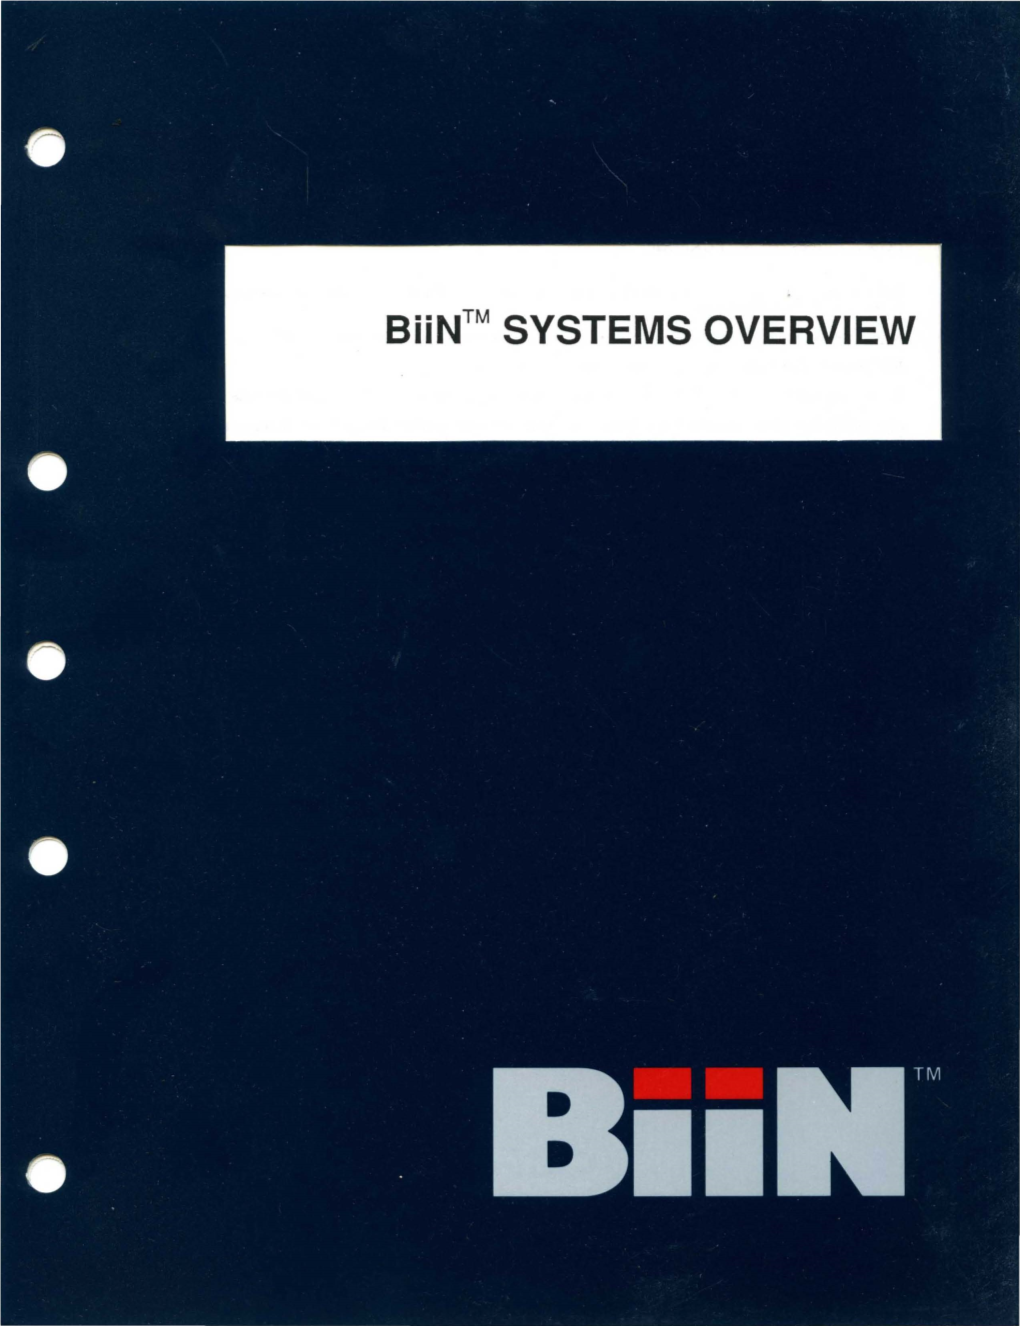 Biintm SYSTEMS OVERVIEW TM